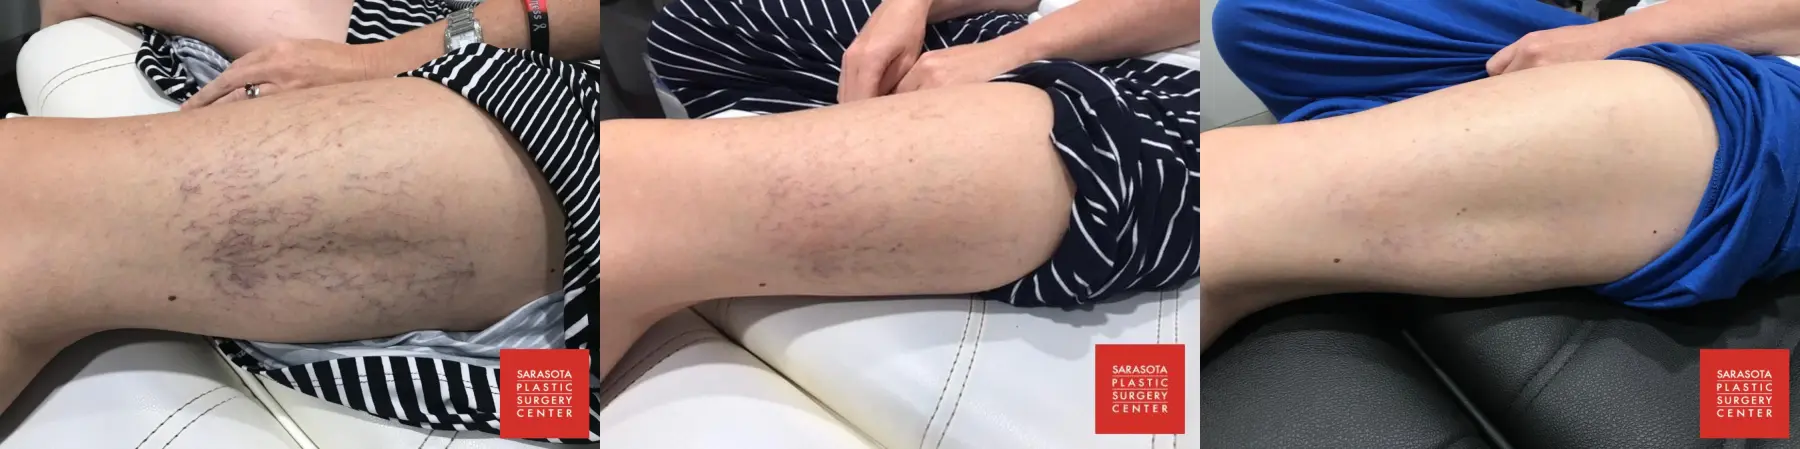 Sclerotherapy: Patient 1 - Before and After  